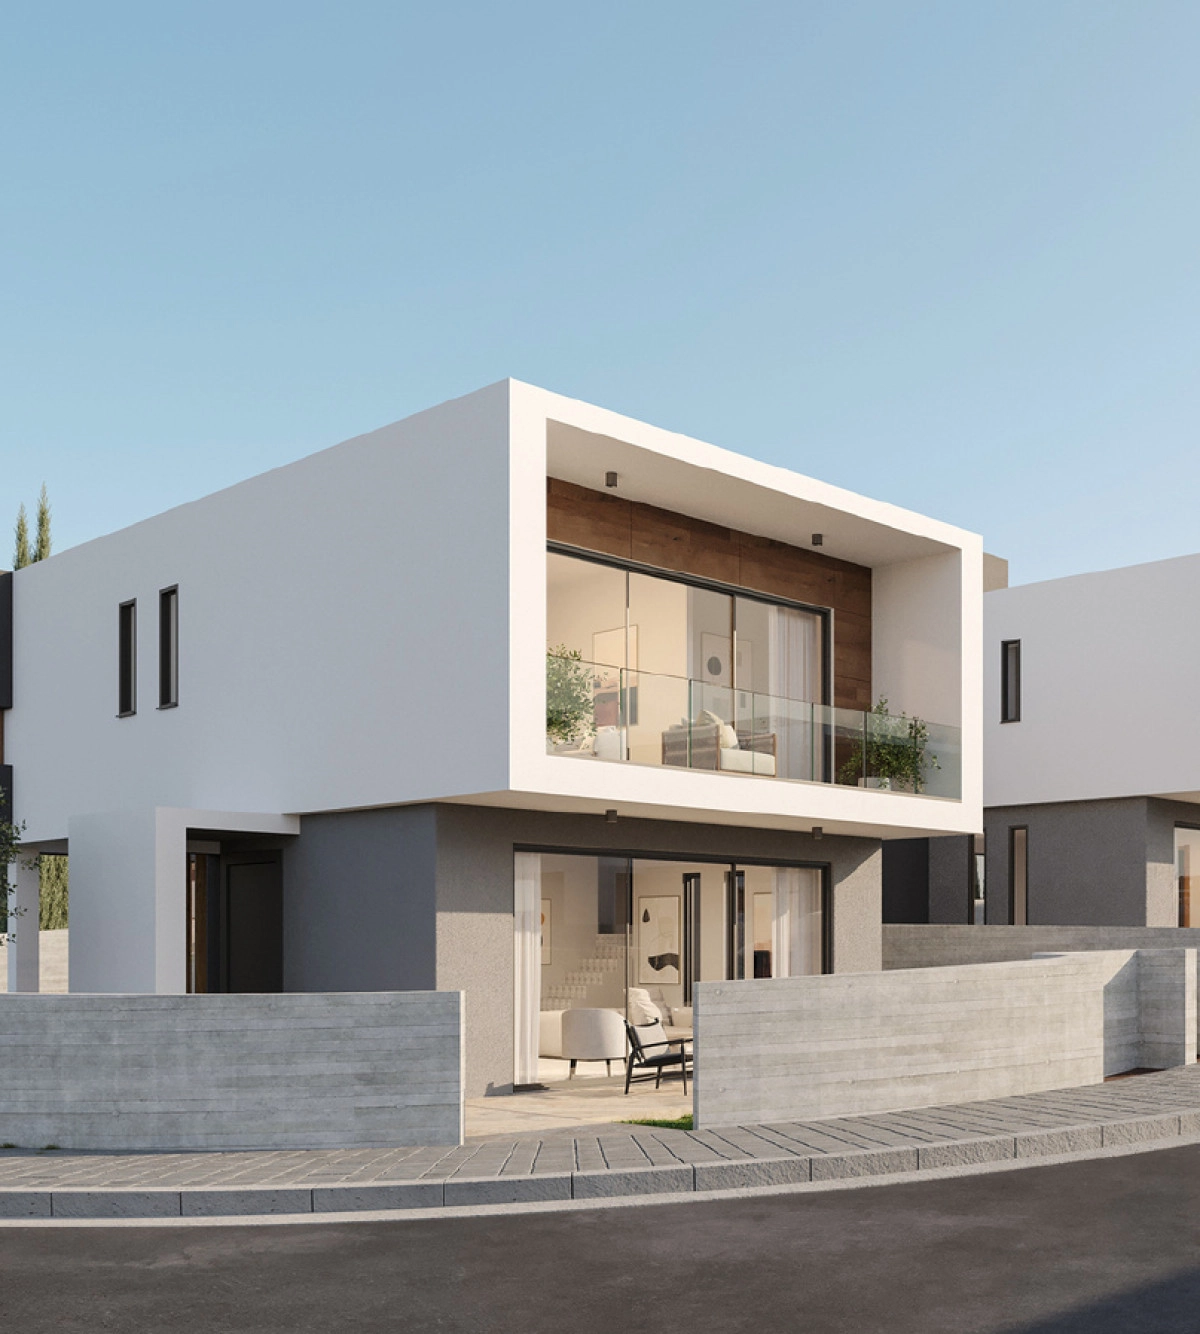 3 Bedroom House for Sale in Empa, Paphos District